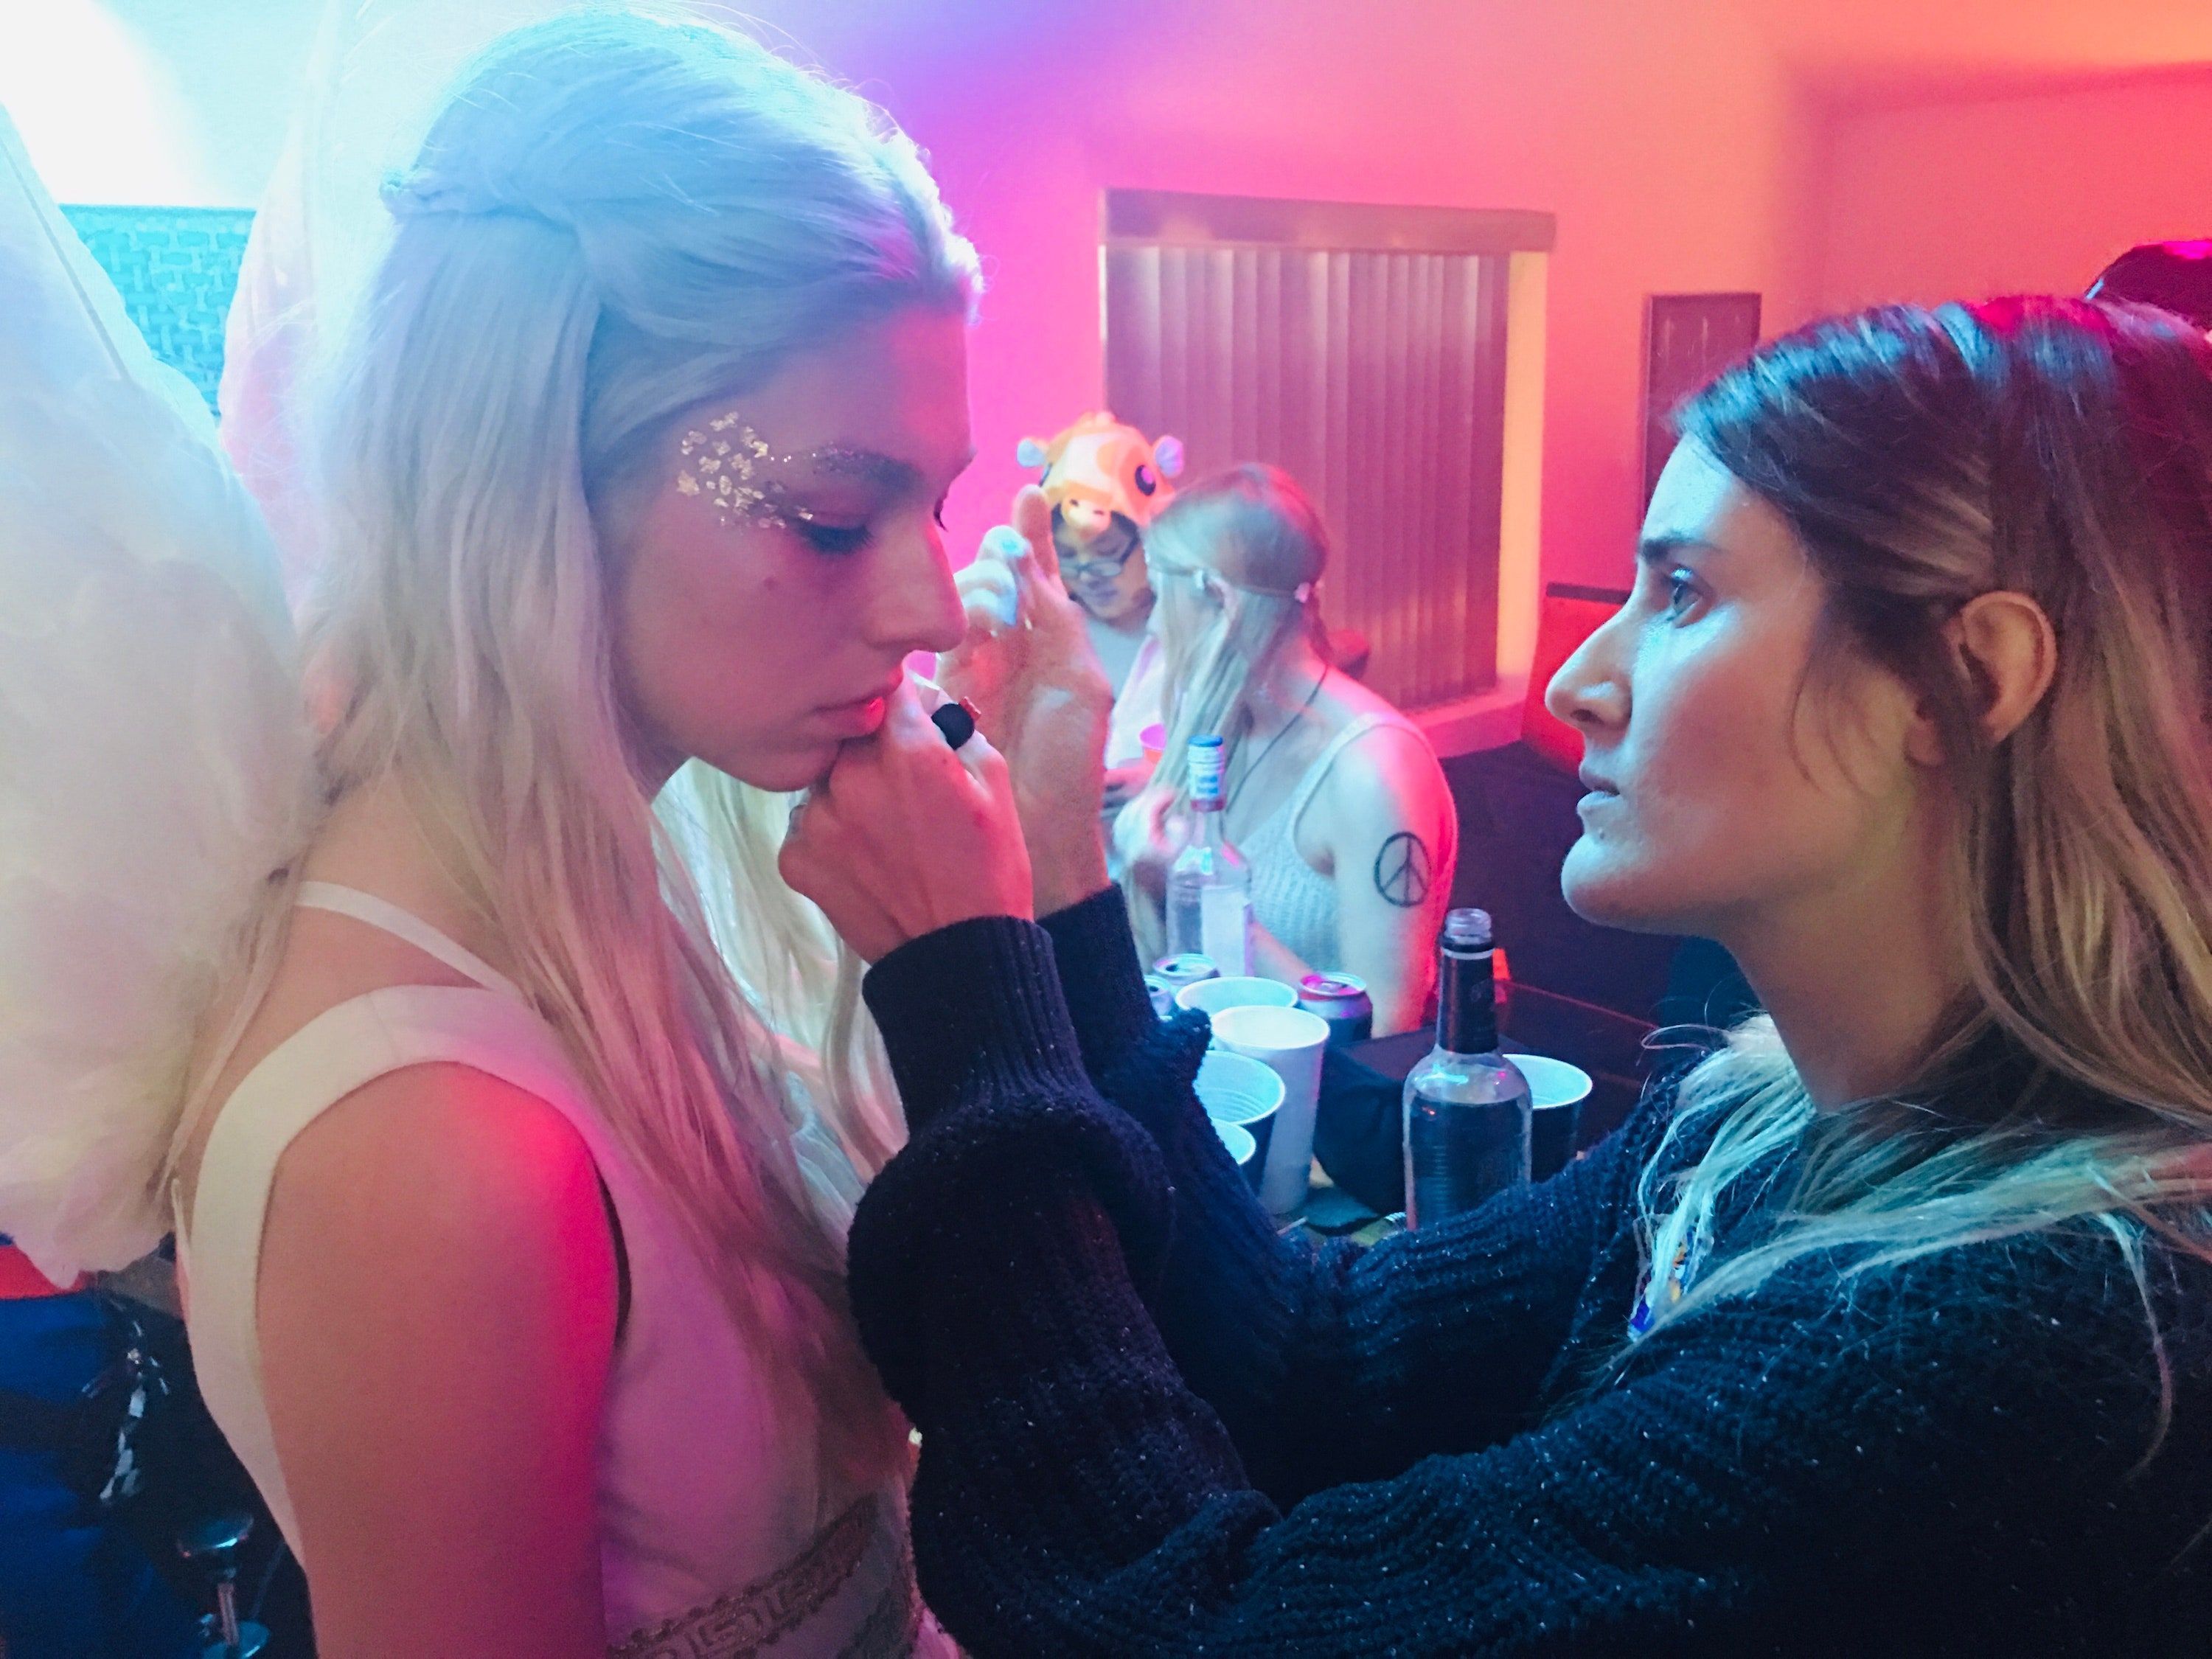 Euphoria' Head Makeup Artist Shares Why You've Never Seen Makeup on TV Like This Before